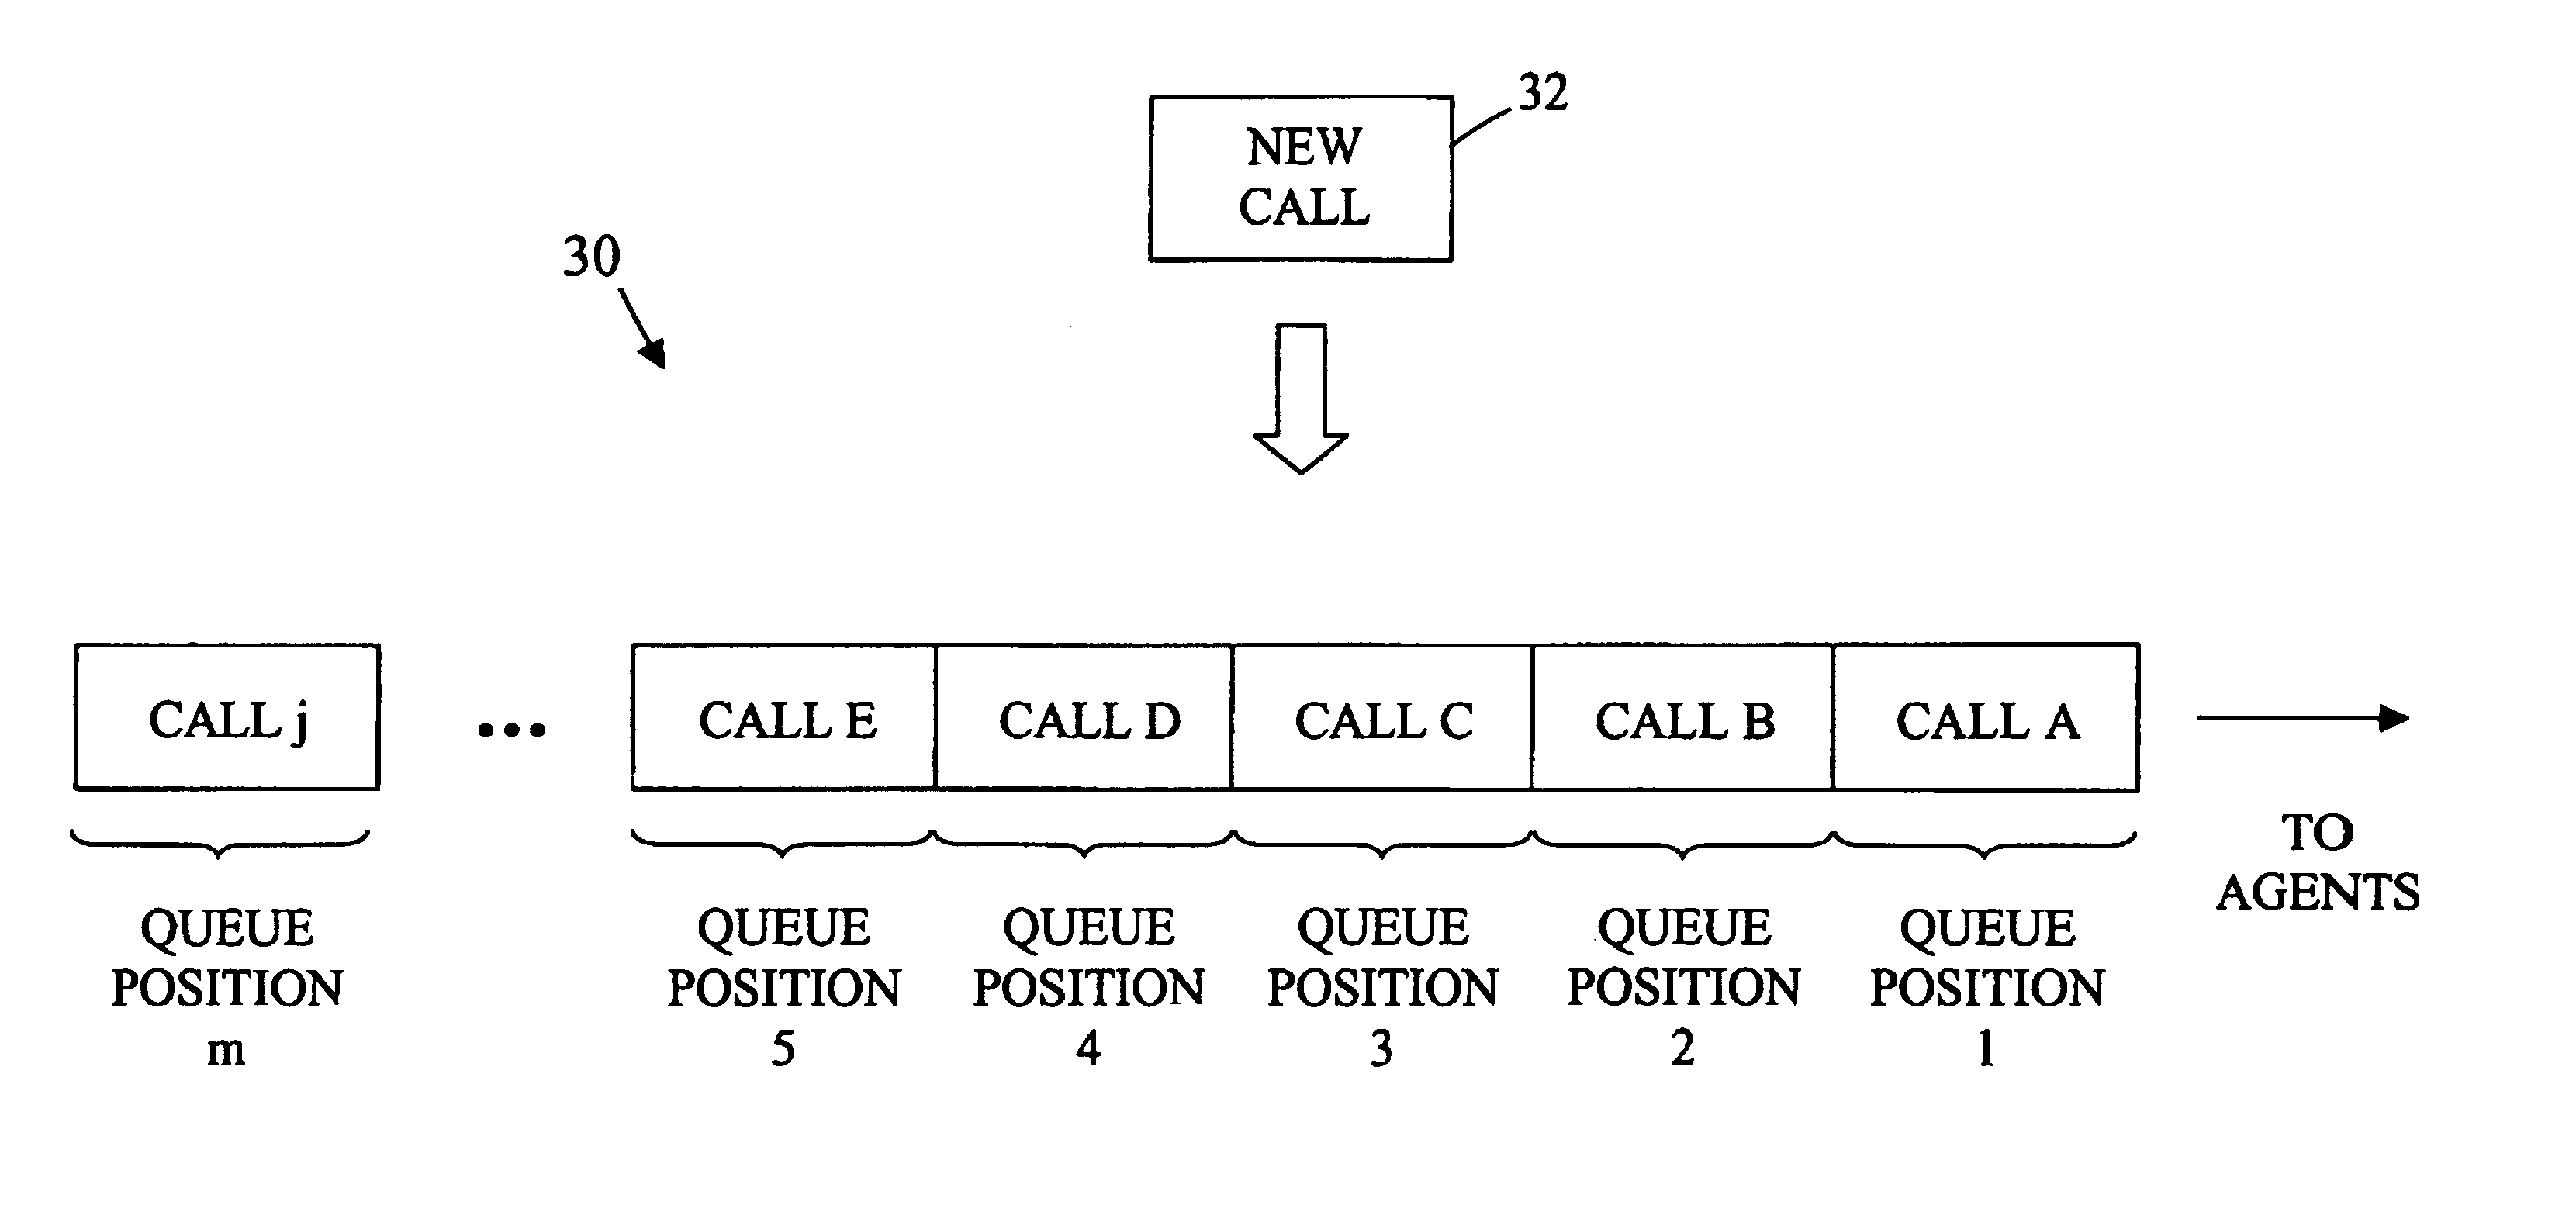 Call management system using dynamic queue position